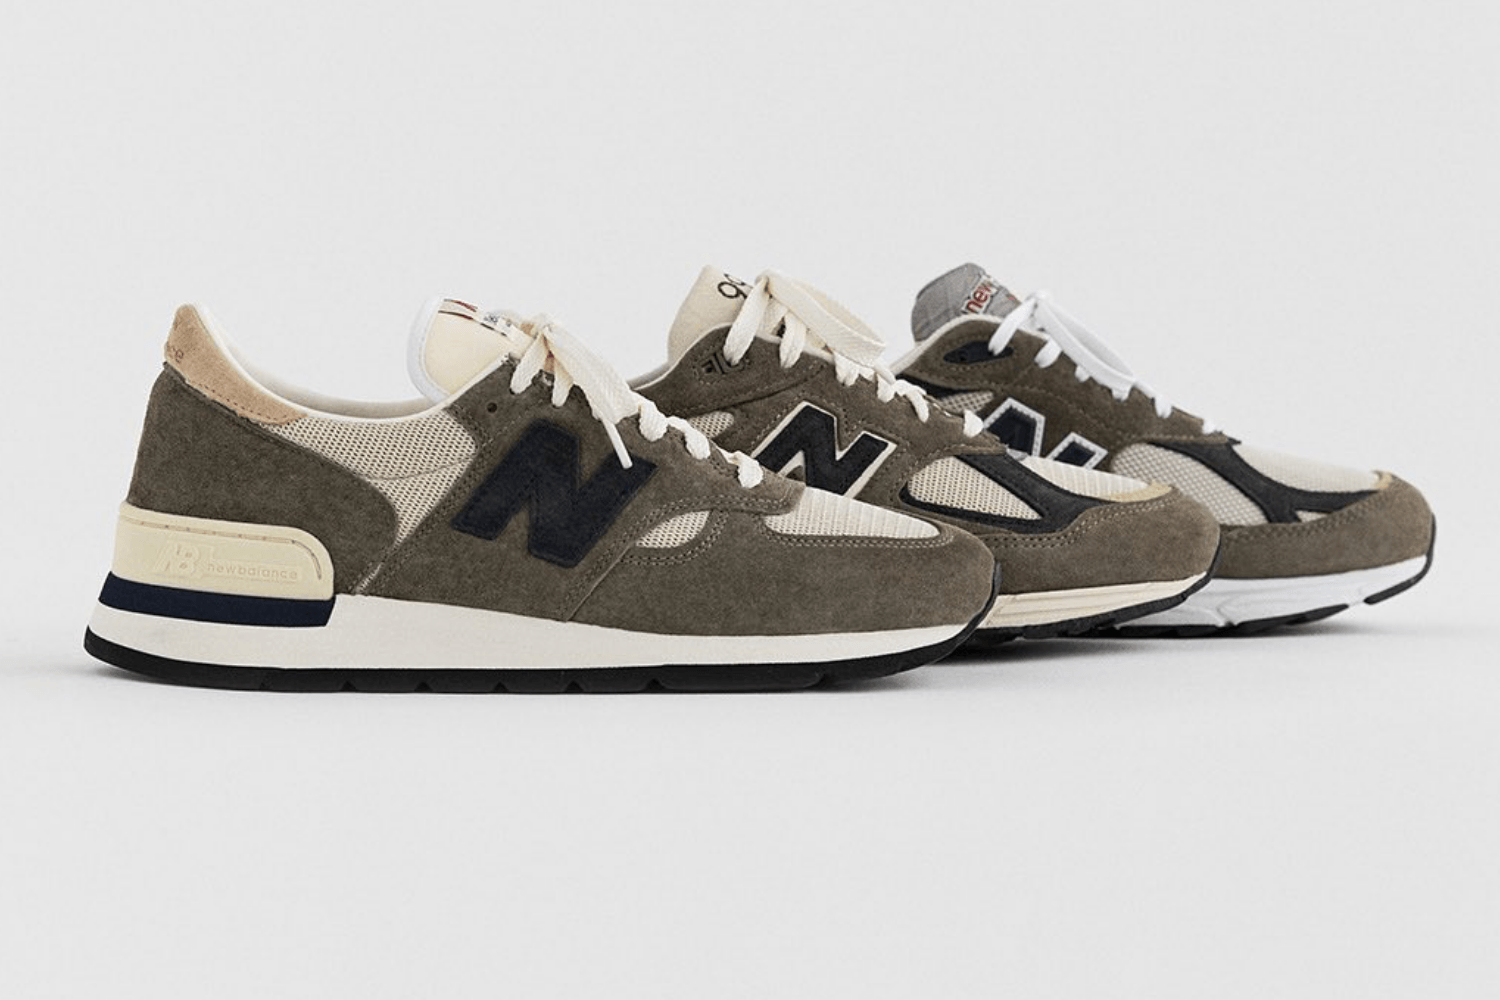 How to style the New Balance Made in USA 'Tan' pack